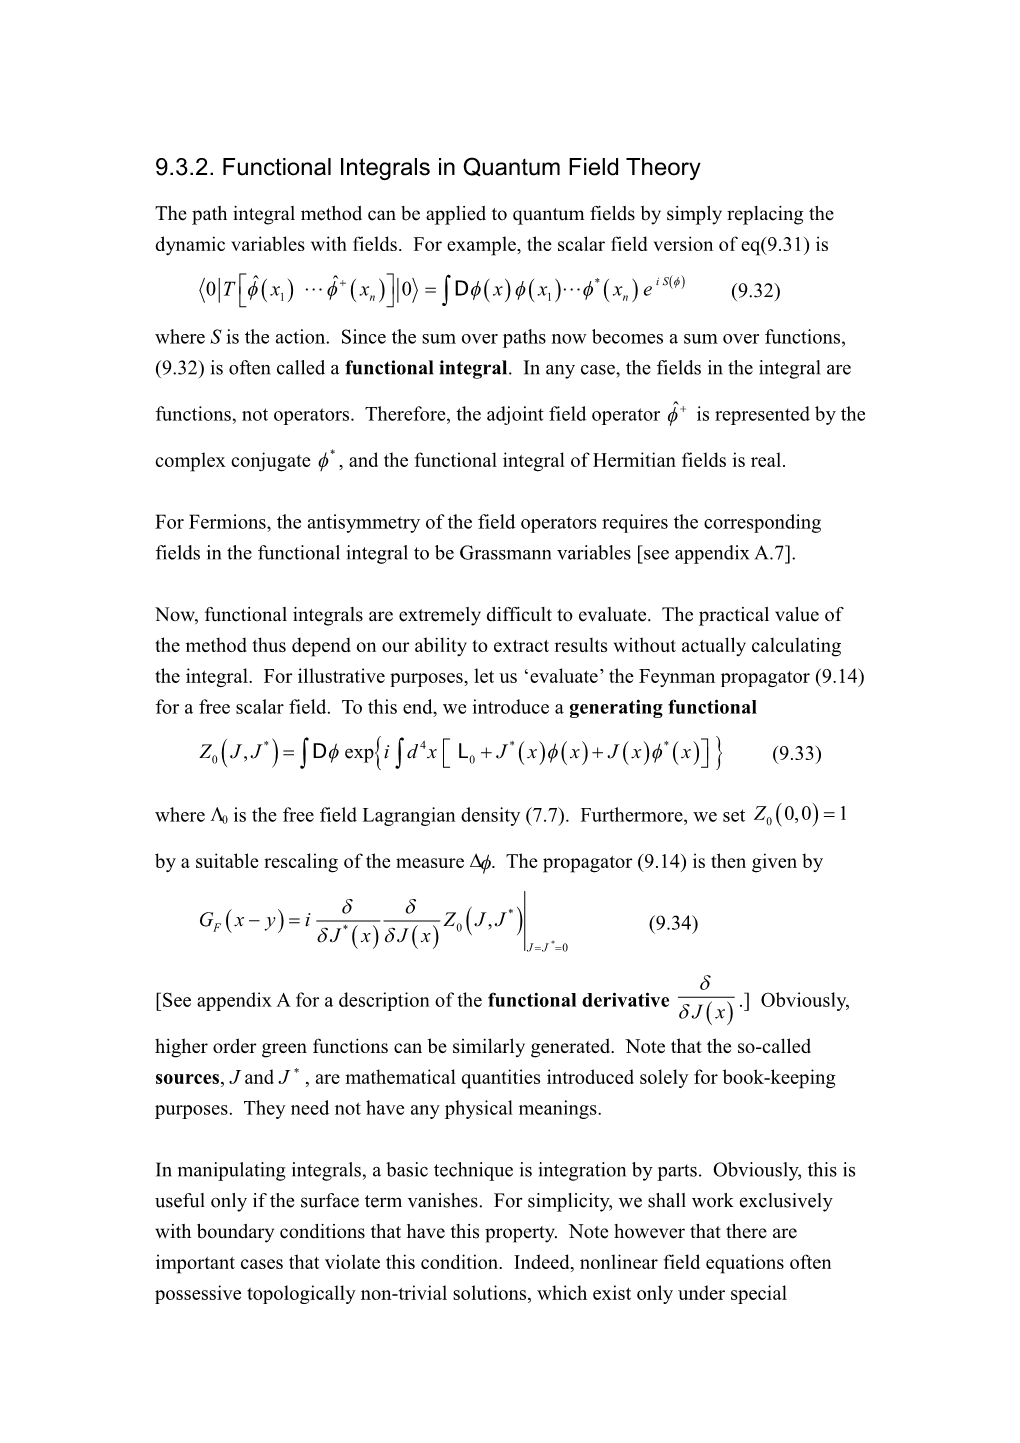 9.3.2. Functional Integrals in Quantum Field Theory